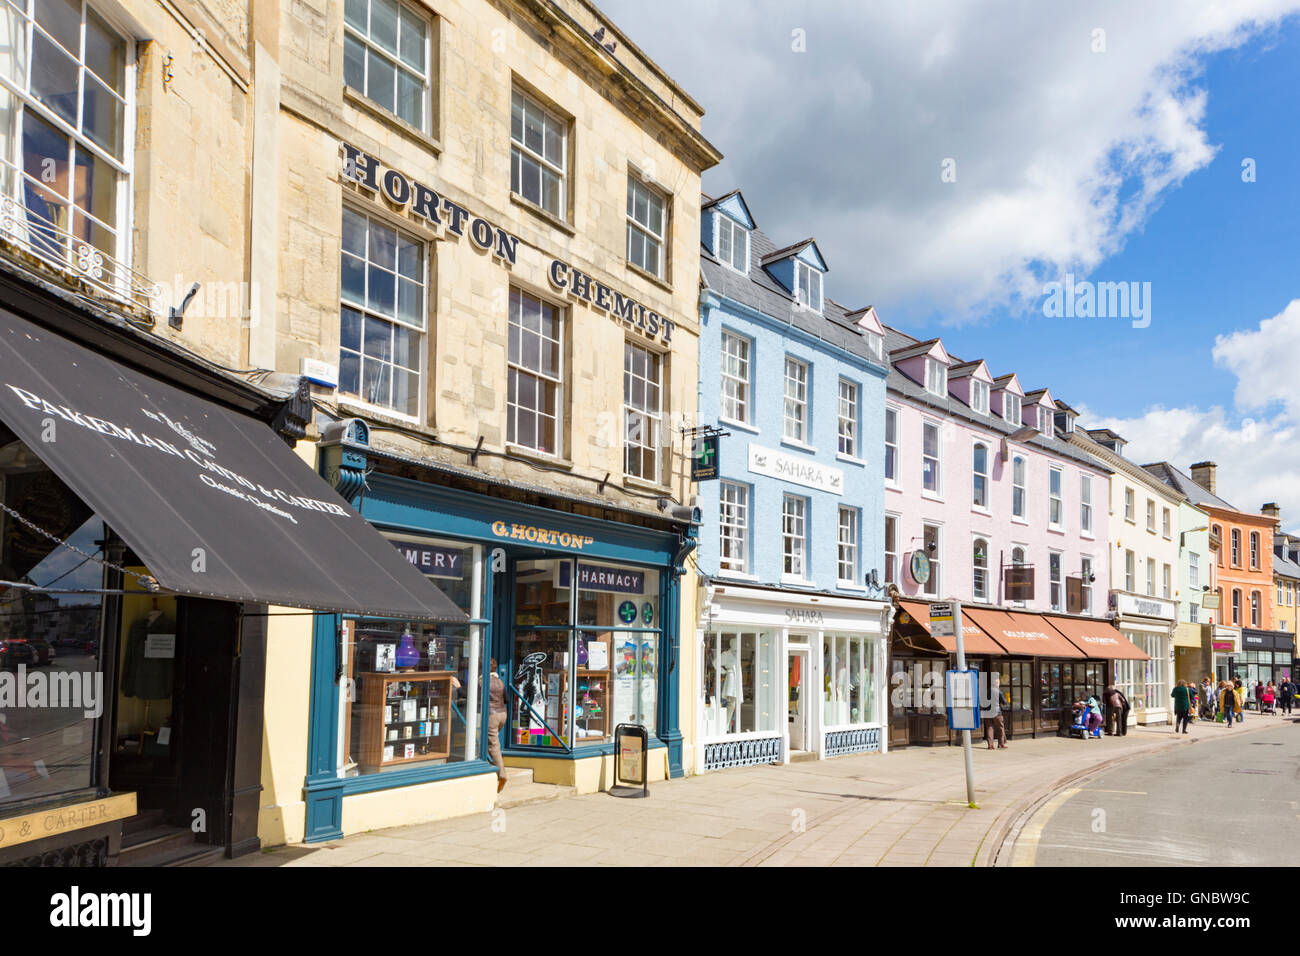 Attractive shops in the Cotswold town of Cirencester, Gloucestershire England, UK Stock Photo